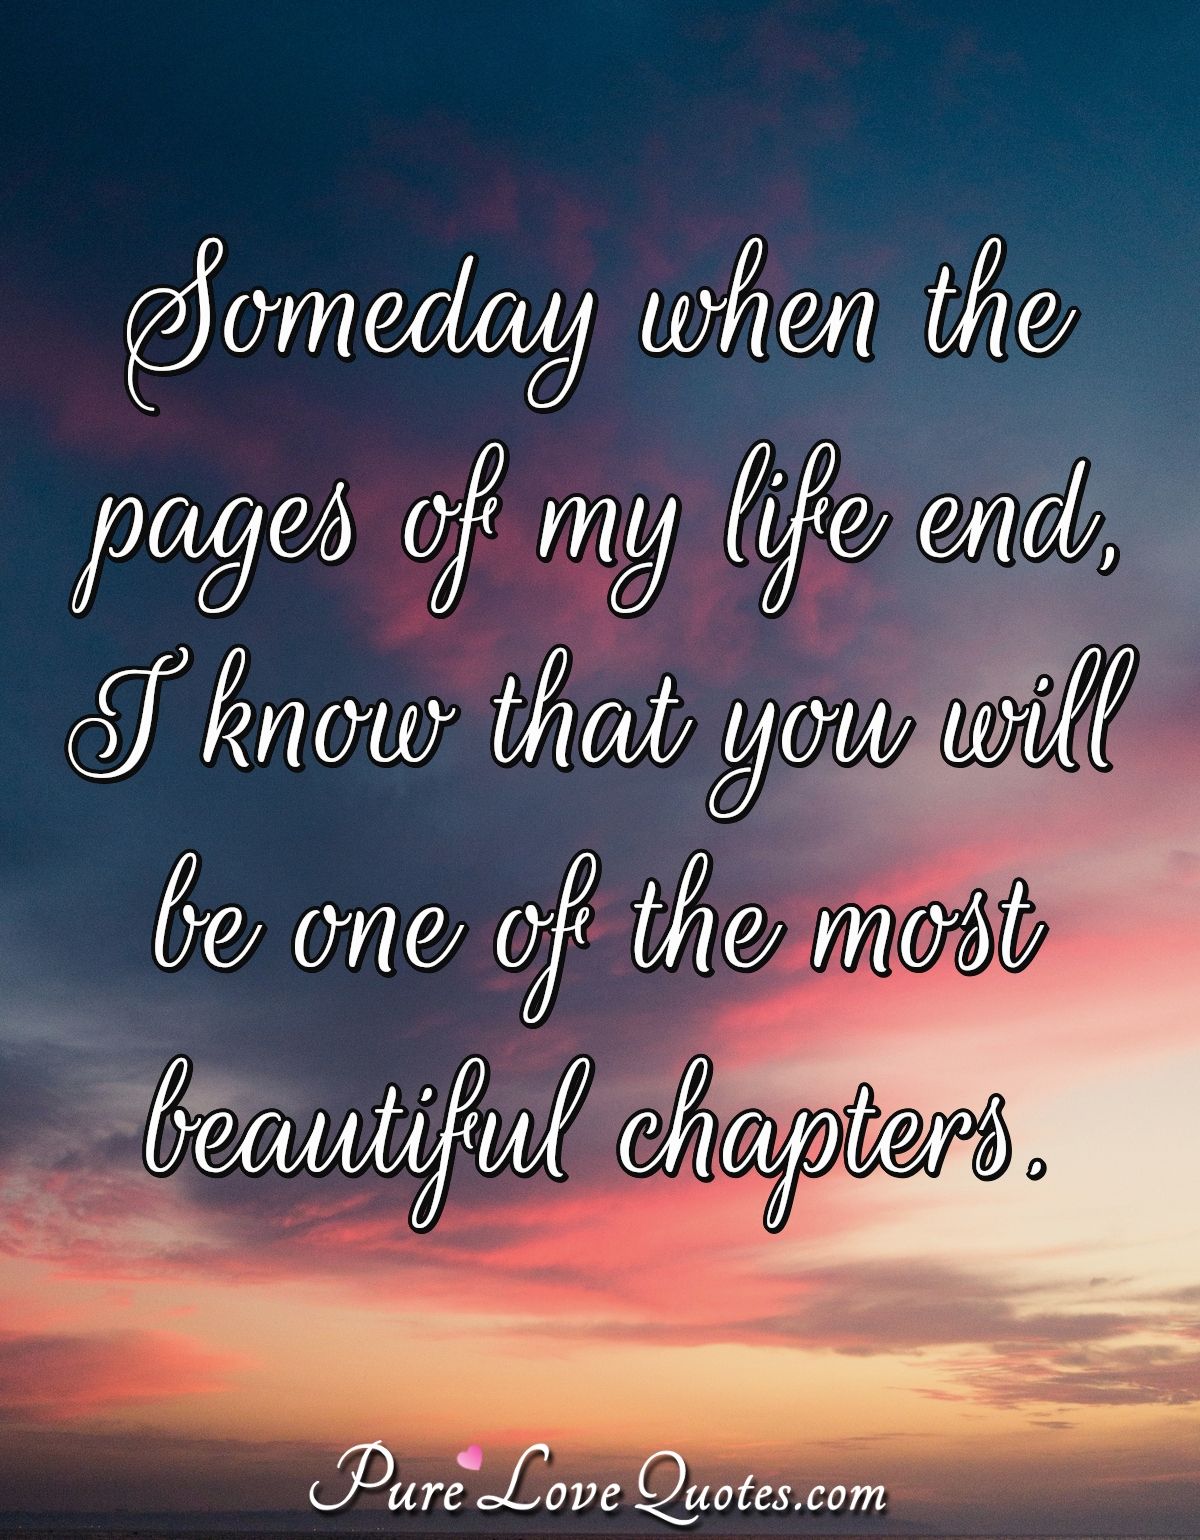 Someday when the pages of my life end, I know that you will be one of the most beautiful chapters. - Anonymous